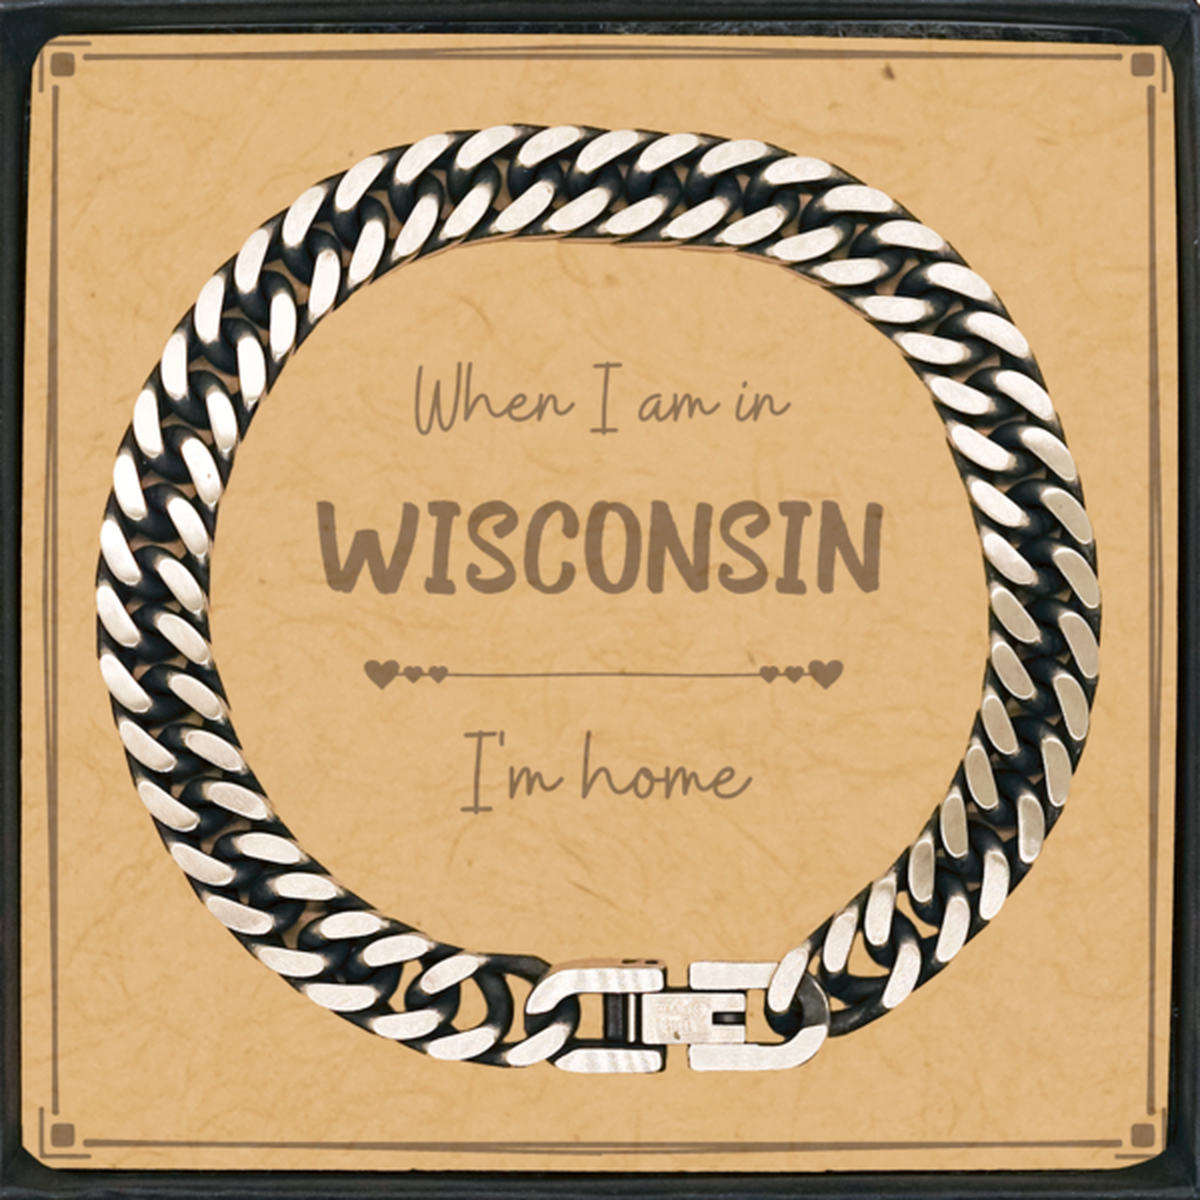 When I am in Wisconsin I'm home Cuban Link Chain Bracelet, Message Card Gifts For Wisconsin, State Wisconsin Birthday Gifts for Friends Coworker